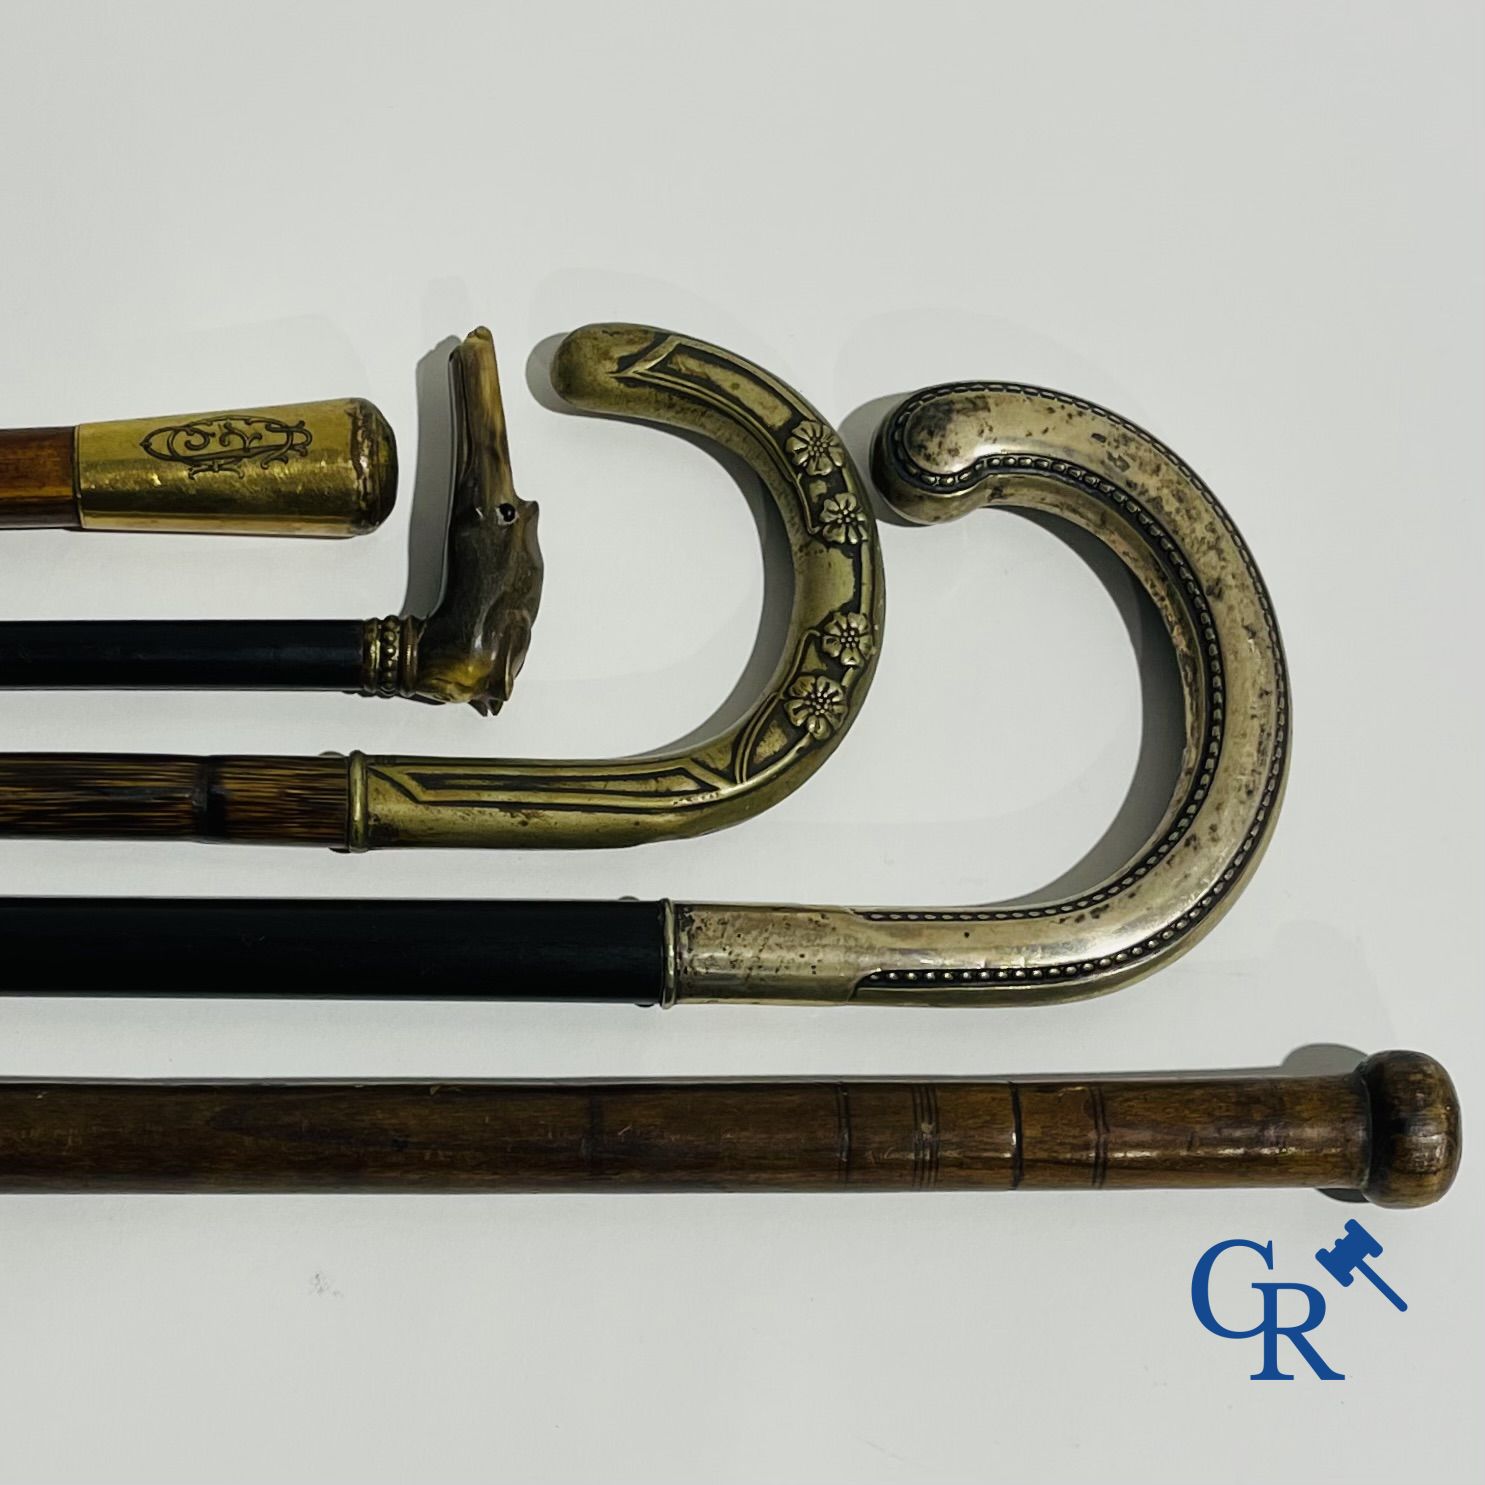 5 walking sticks including 1 with silver handle. - Image 4 of 4